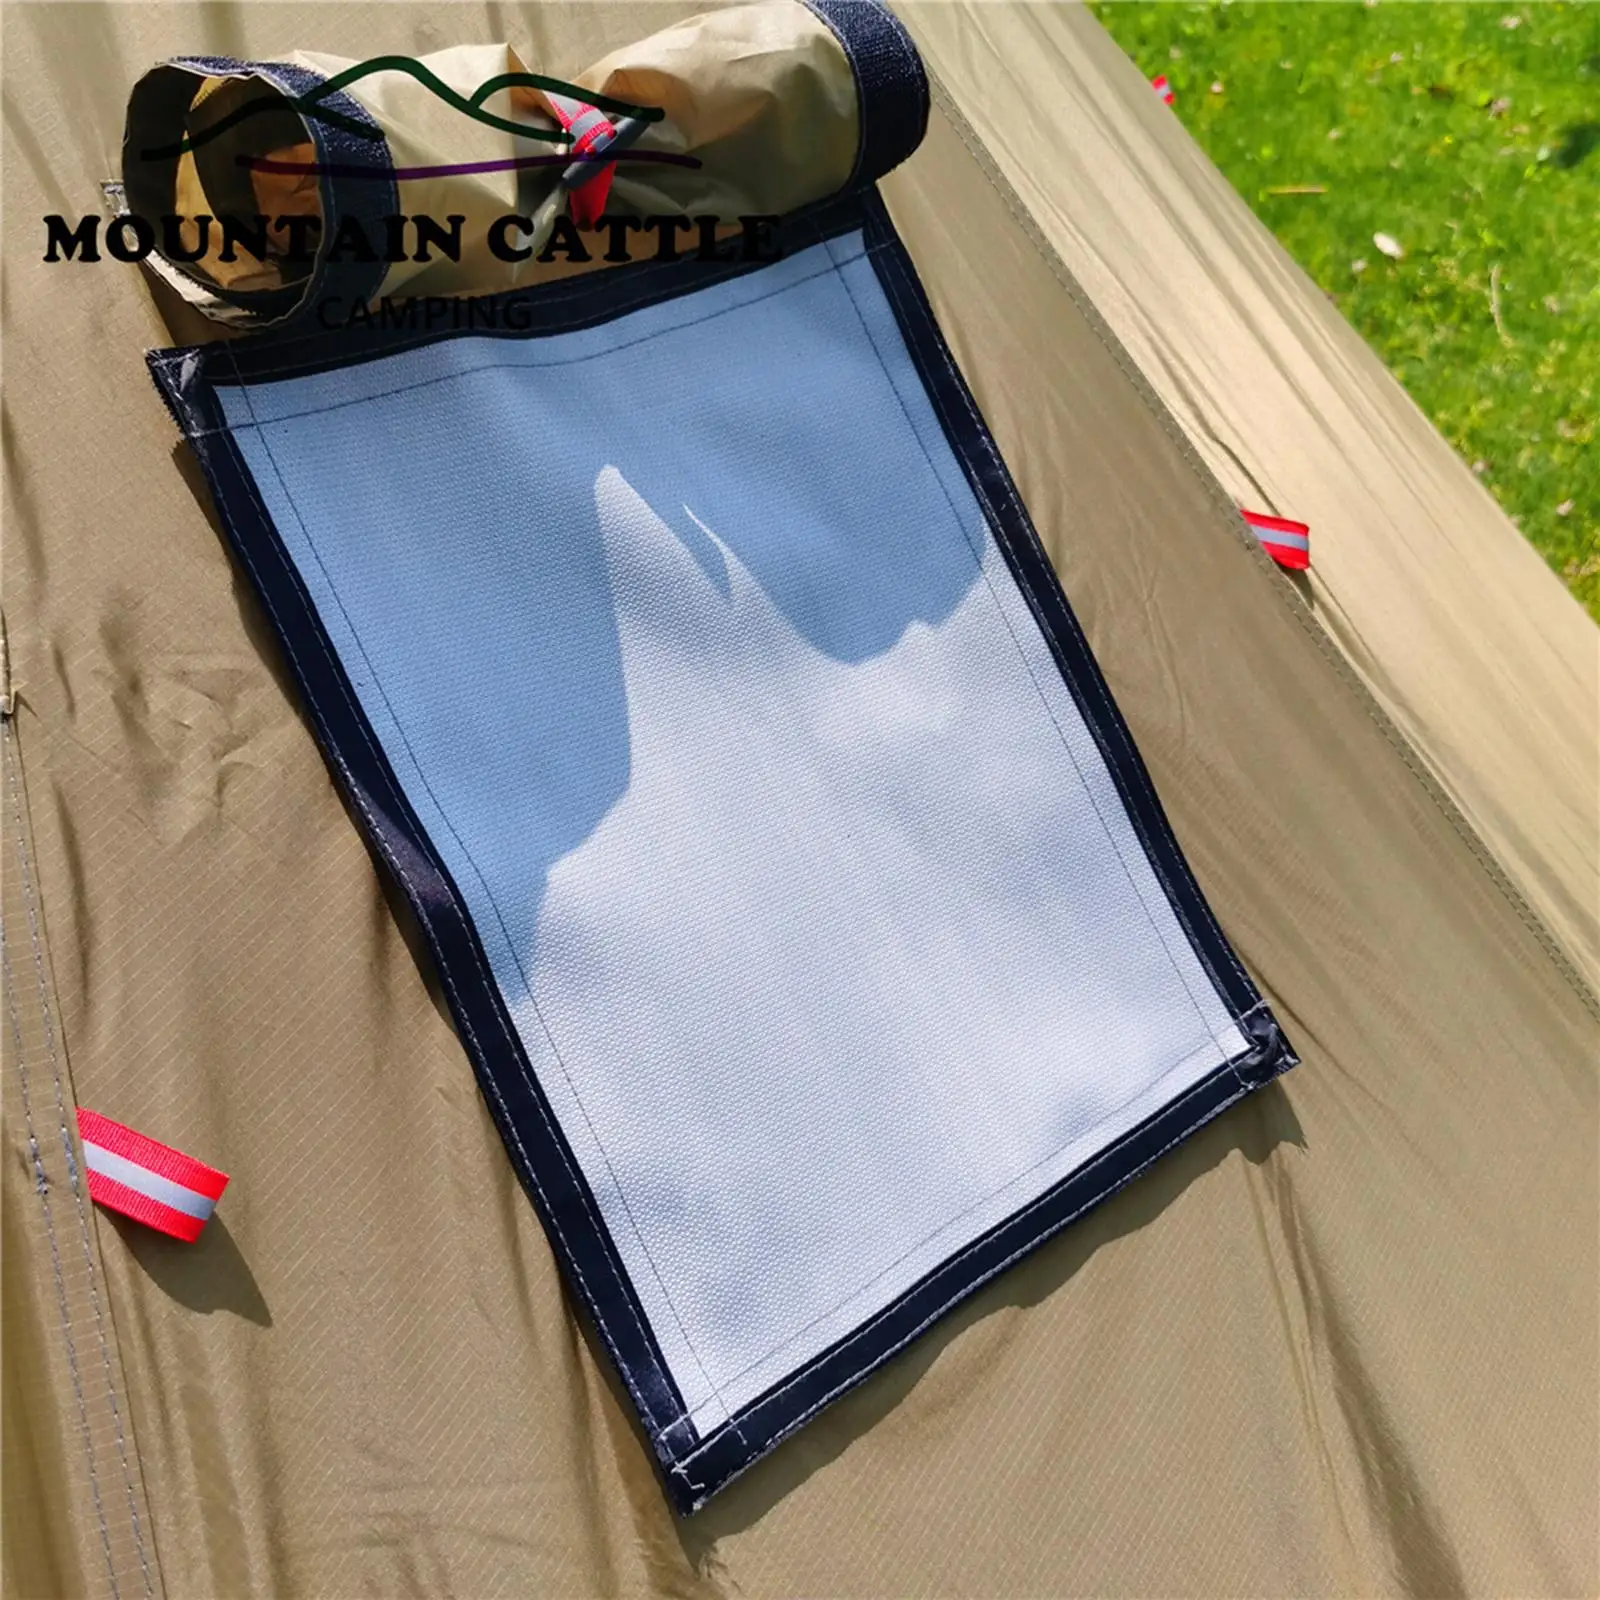  Stove Smoke Flushing Chimney Stove Tailorable Heavy-Duty Tent Resistant for Camping Mountaineering